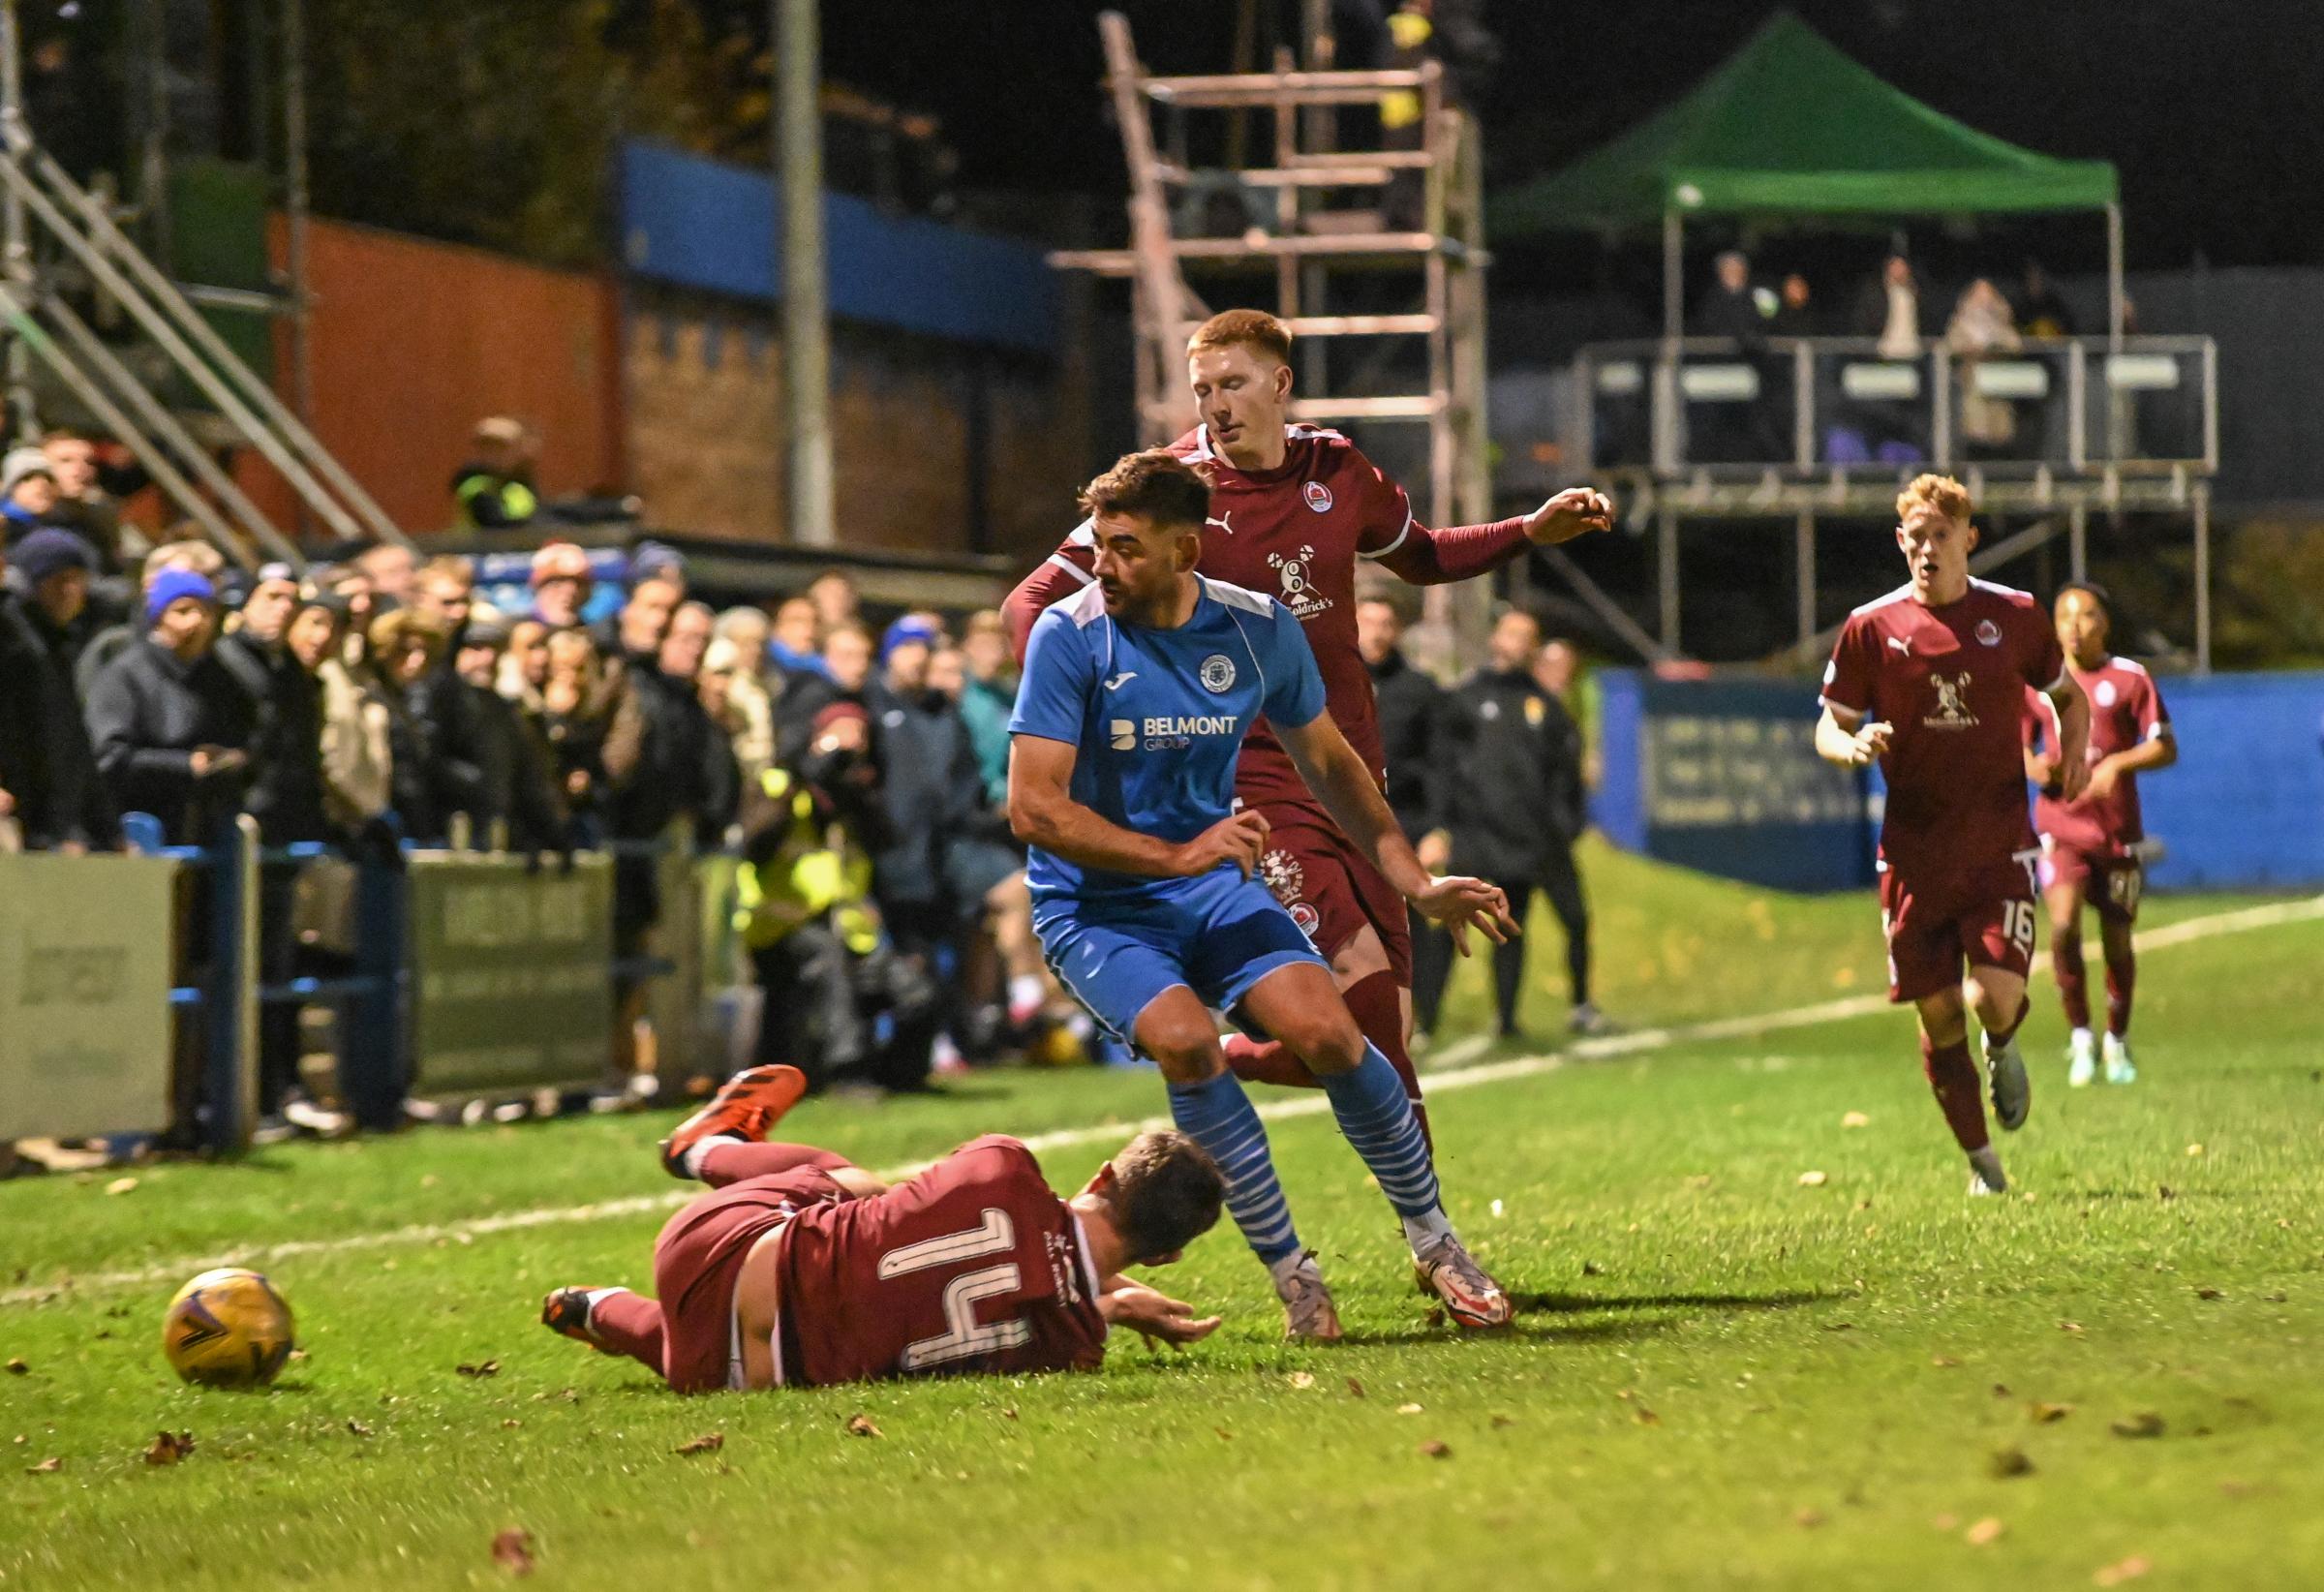 Musselburgh Athletic tackled Clyde earlier this season in the Scottish Cup. Image: Alan Wilson